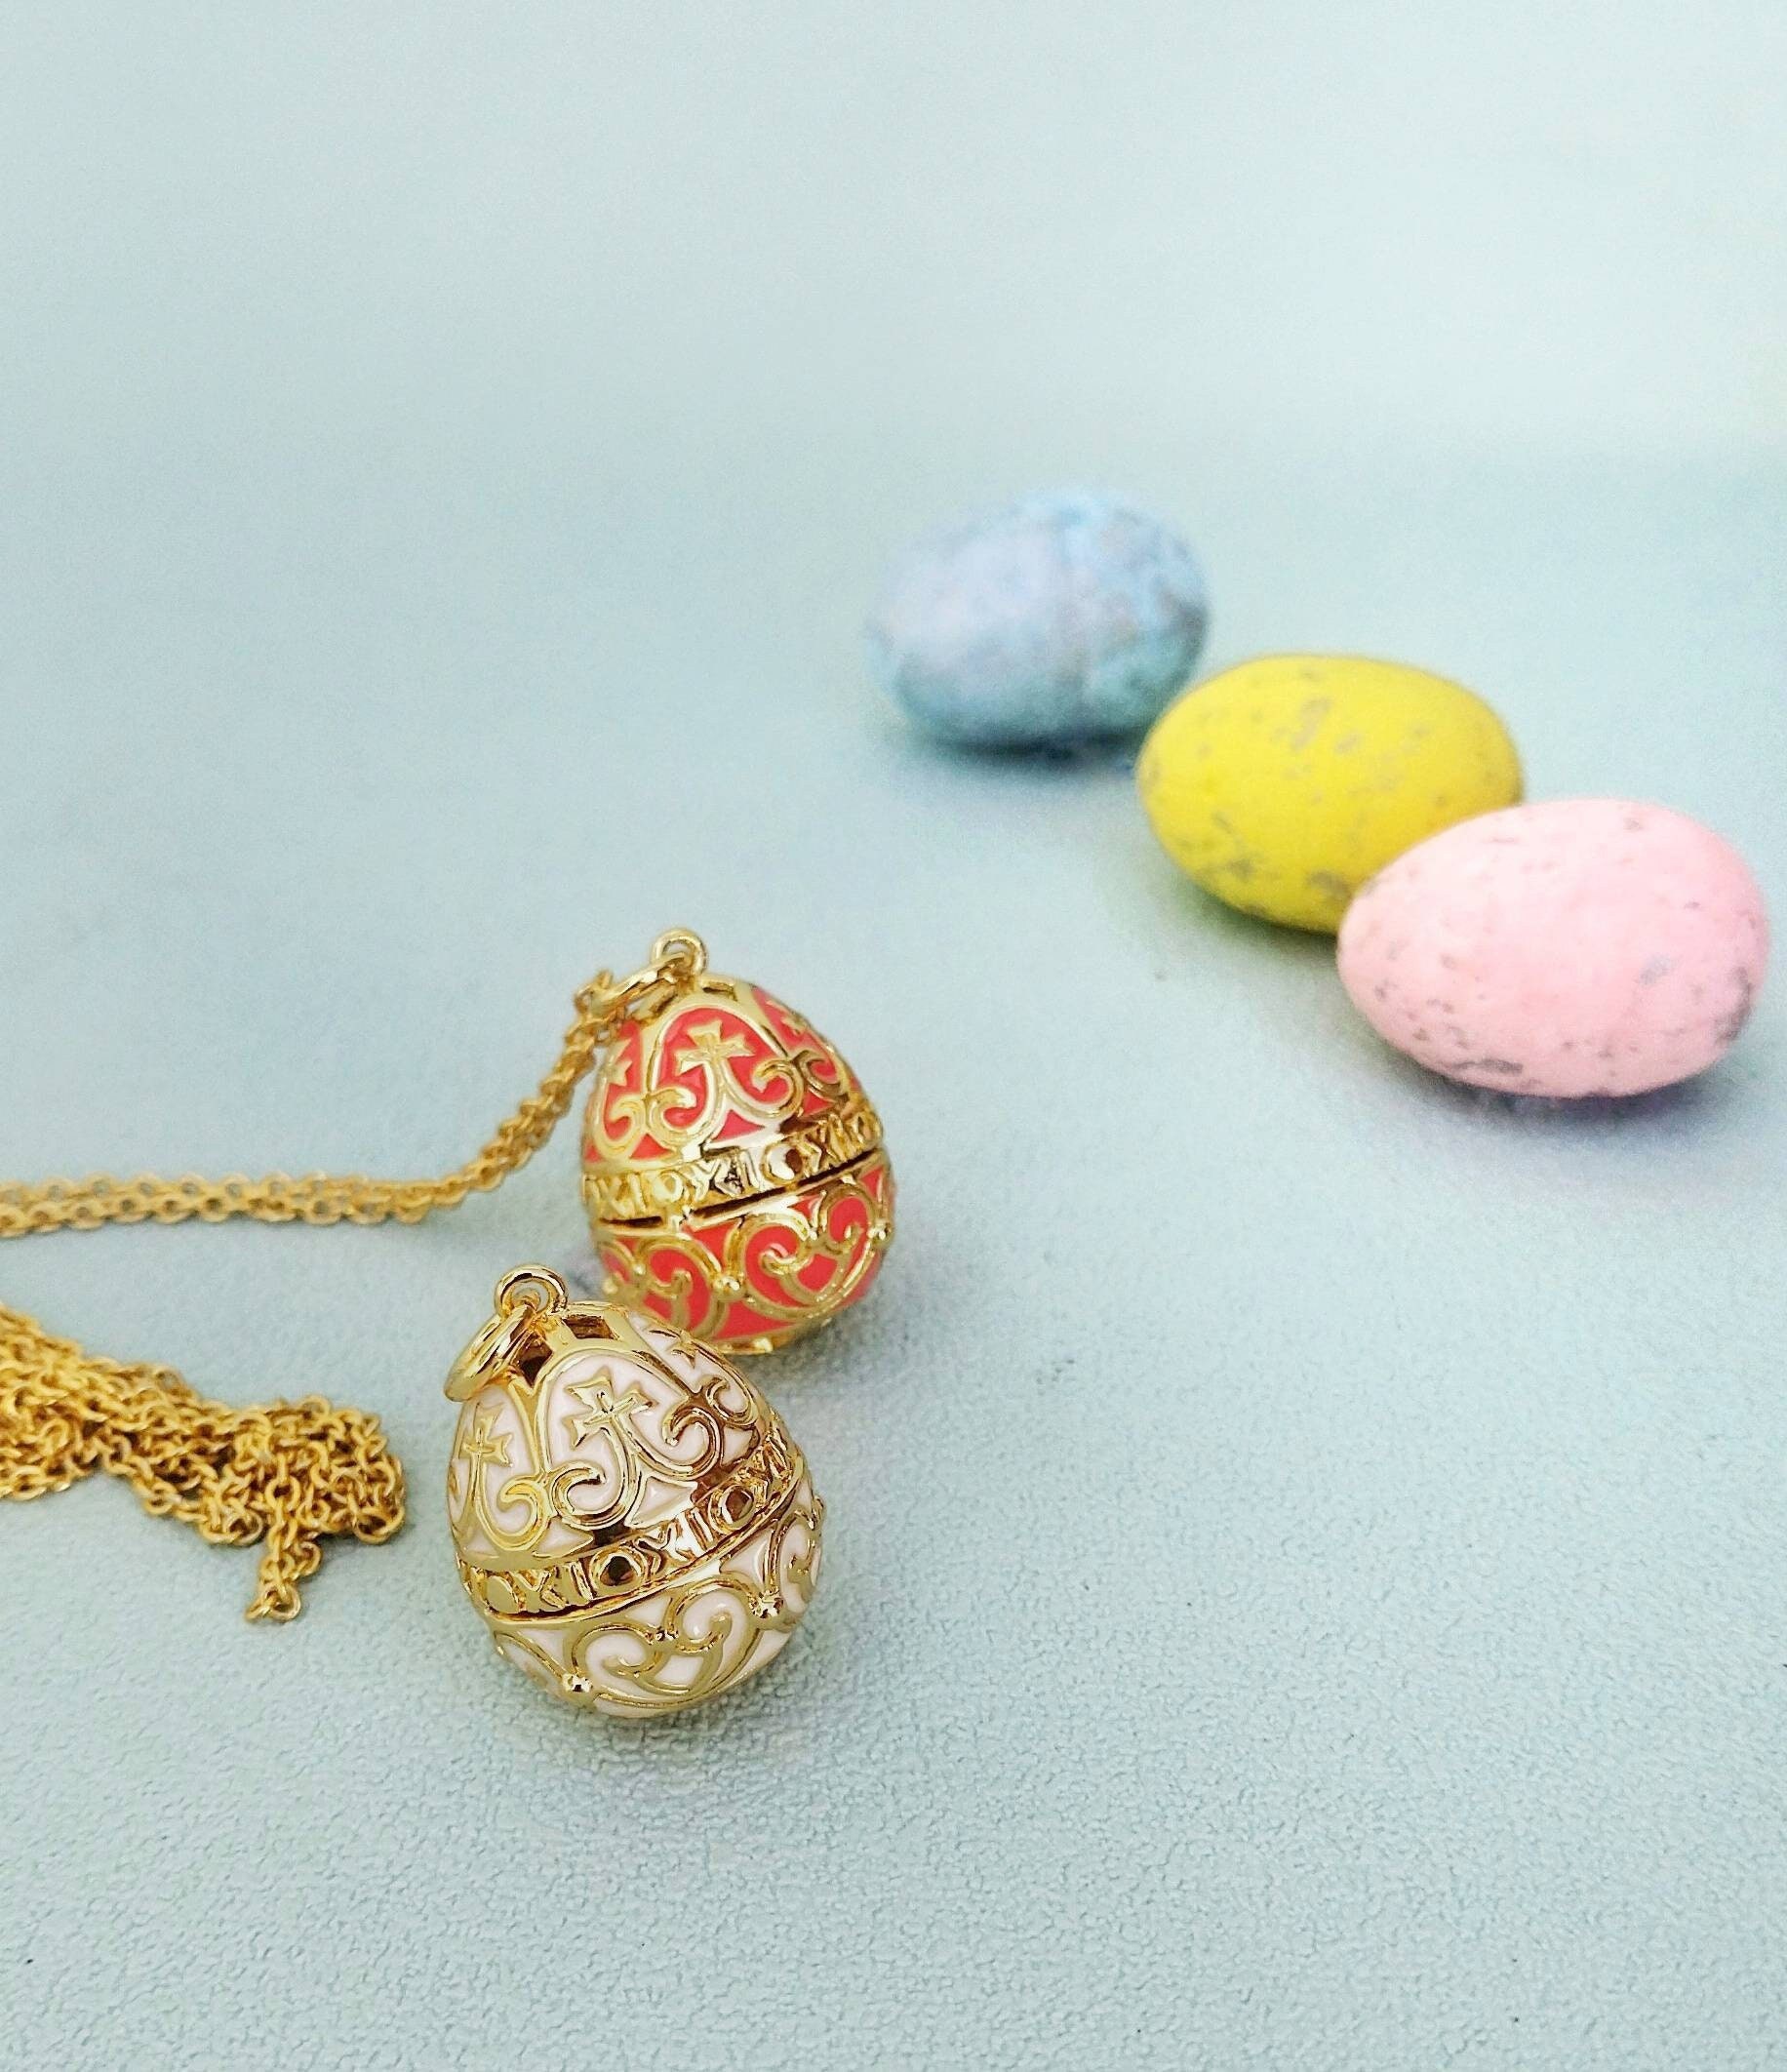 10pcs Easter Colorful Eggs DIY Design for Jewelry Making Earring Bracelet  Necklace Keychain Handmade Accessories Enamel